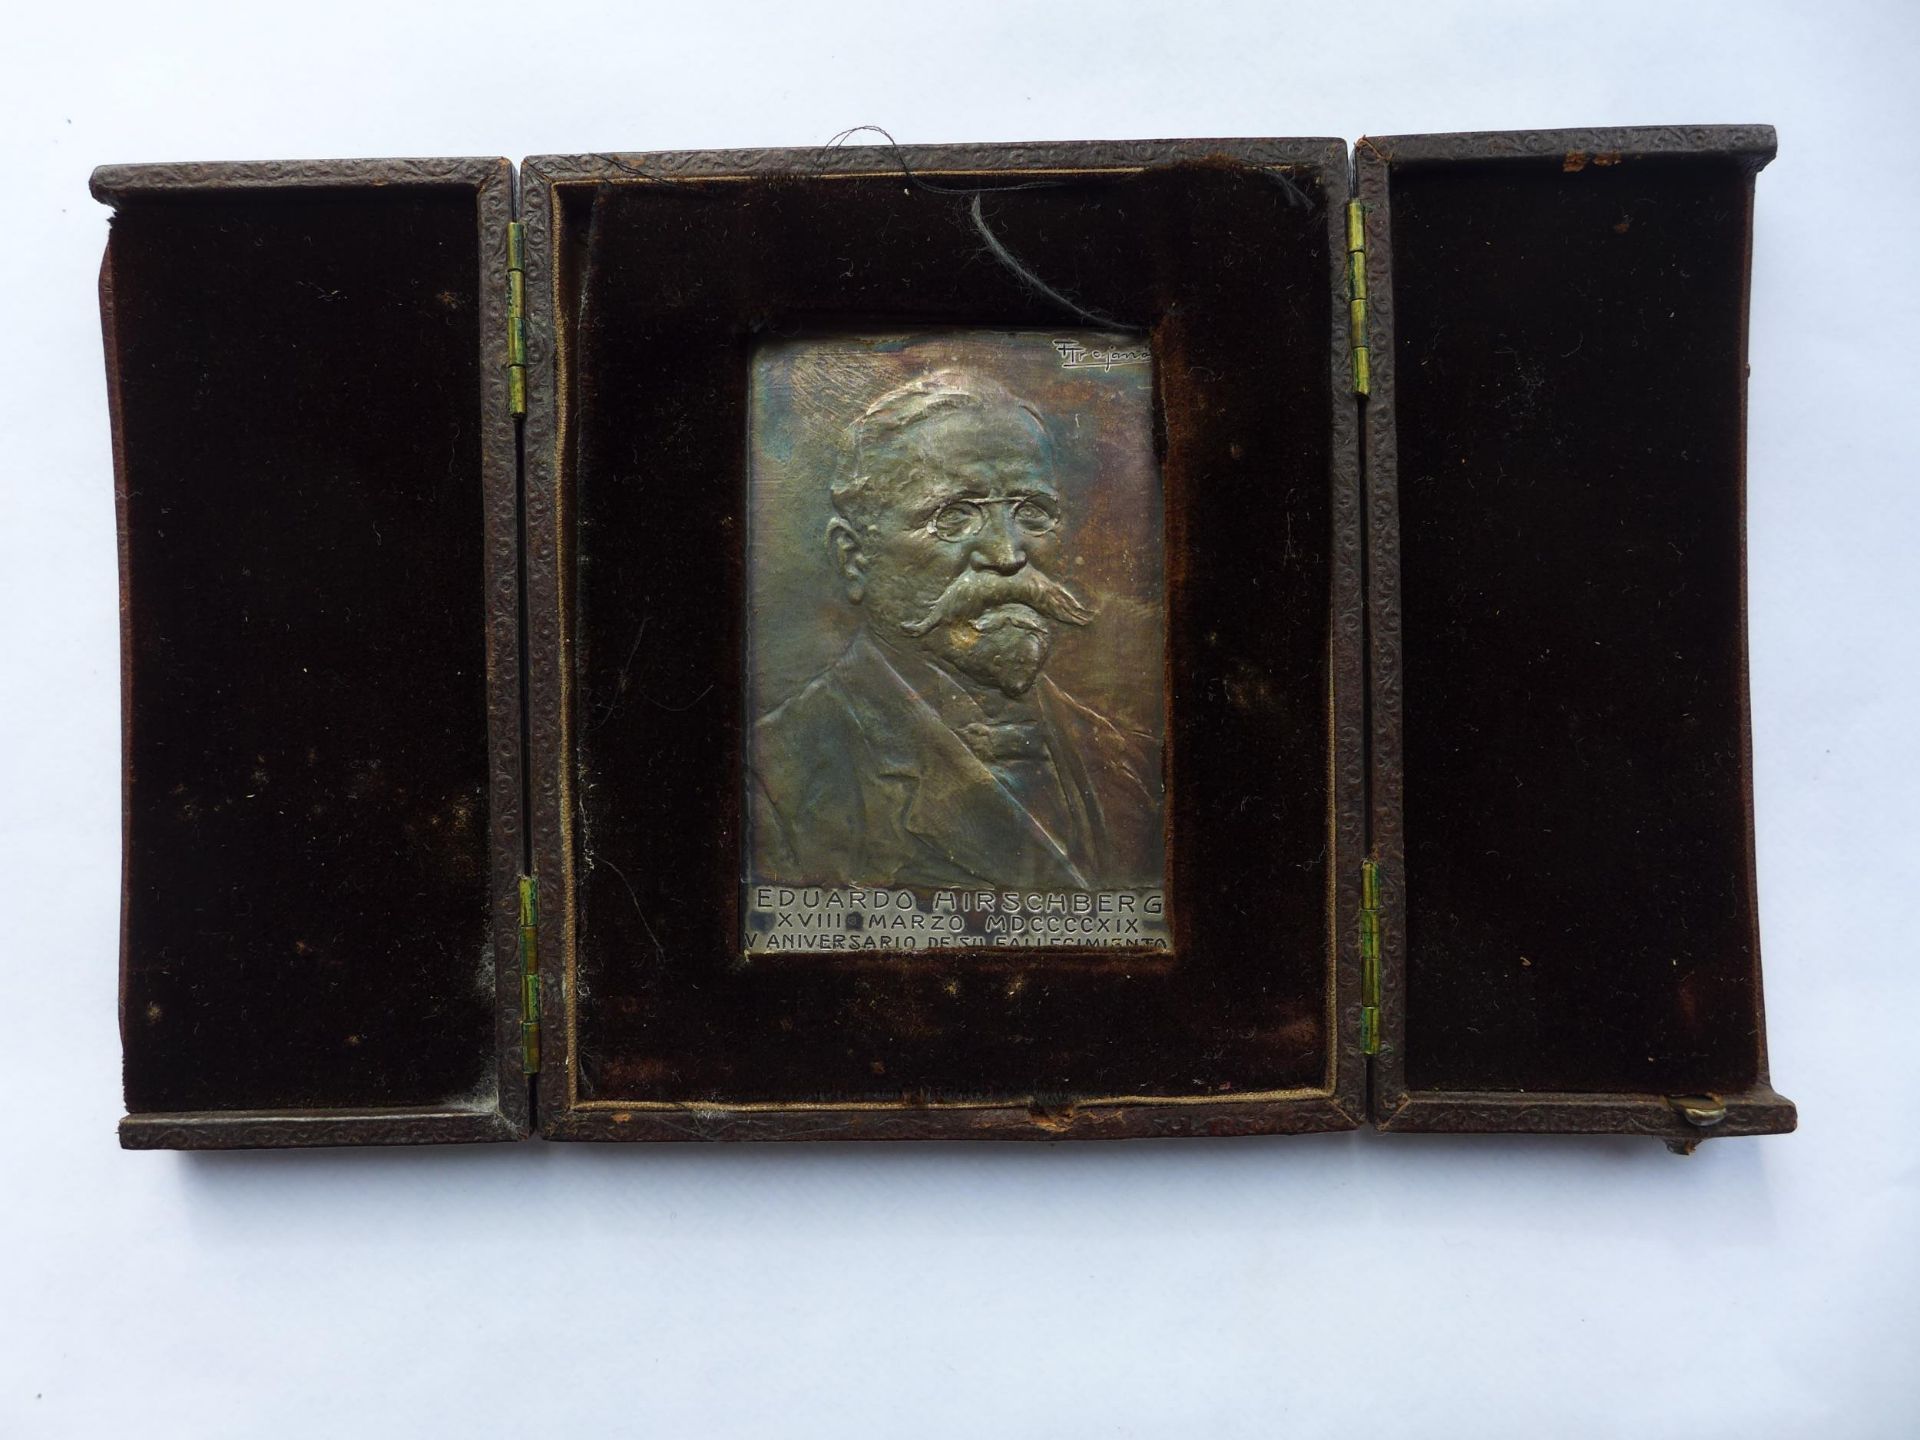 A CASED WHITE METAL EDUARDO HIRSCHBERG UNIFACE PLAQUE DATED 18TH MARCH 1919 BY F TROJANA, 72MM BY